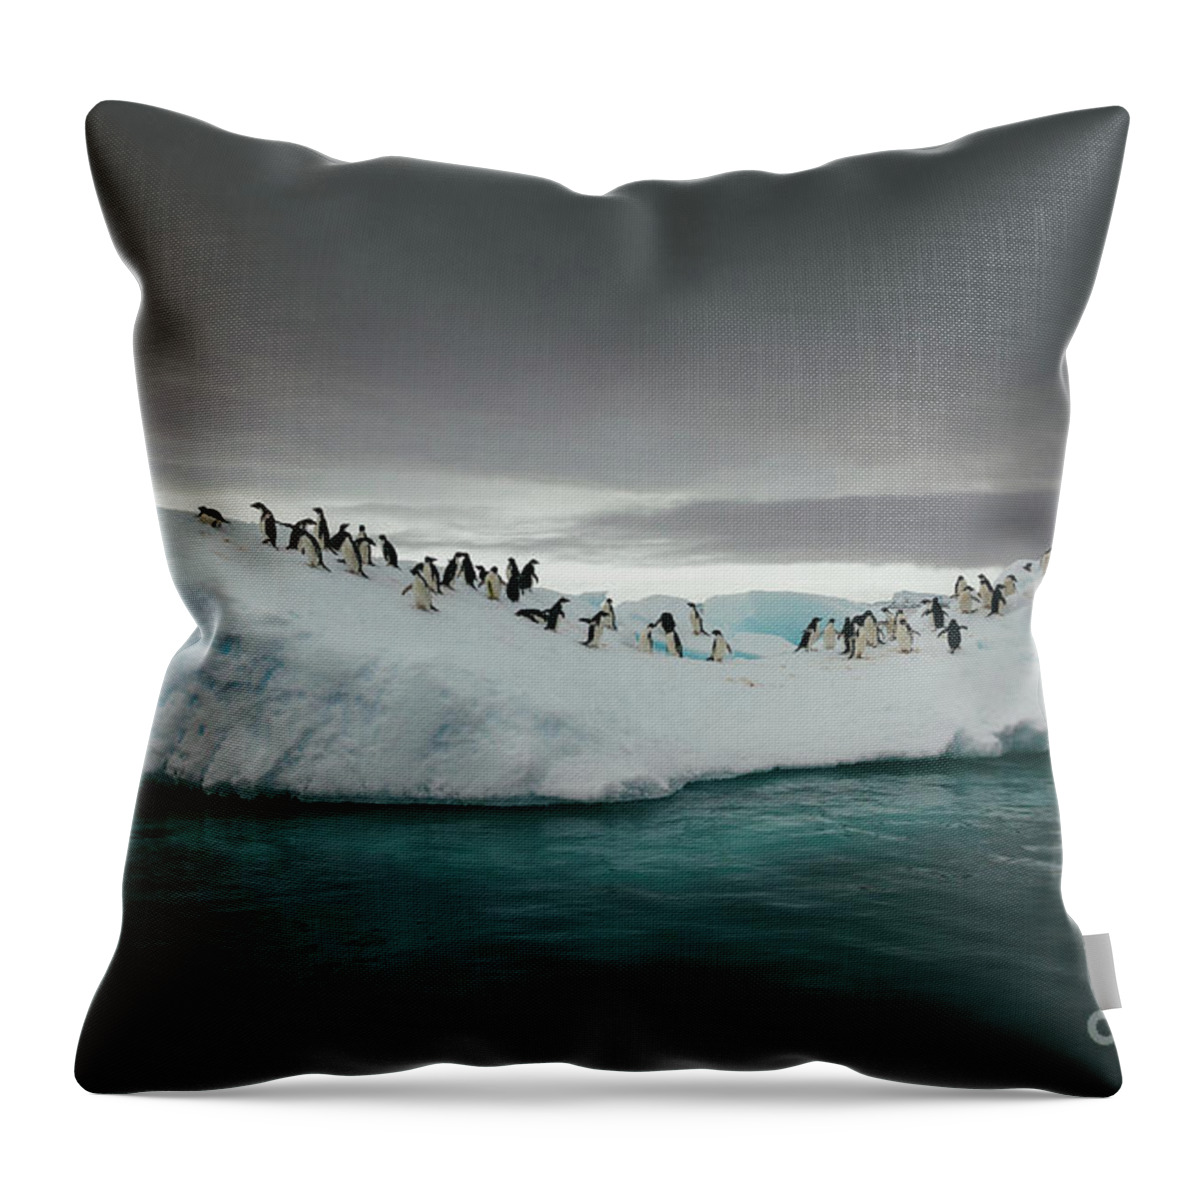 Iceberg Throw Pillow featuring the photograph Penguins On An Iceberg In The Sea by David Merron